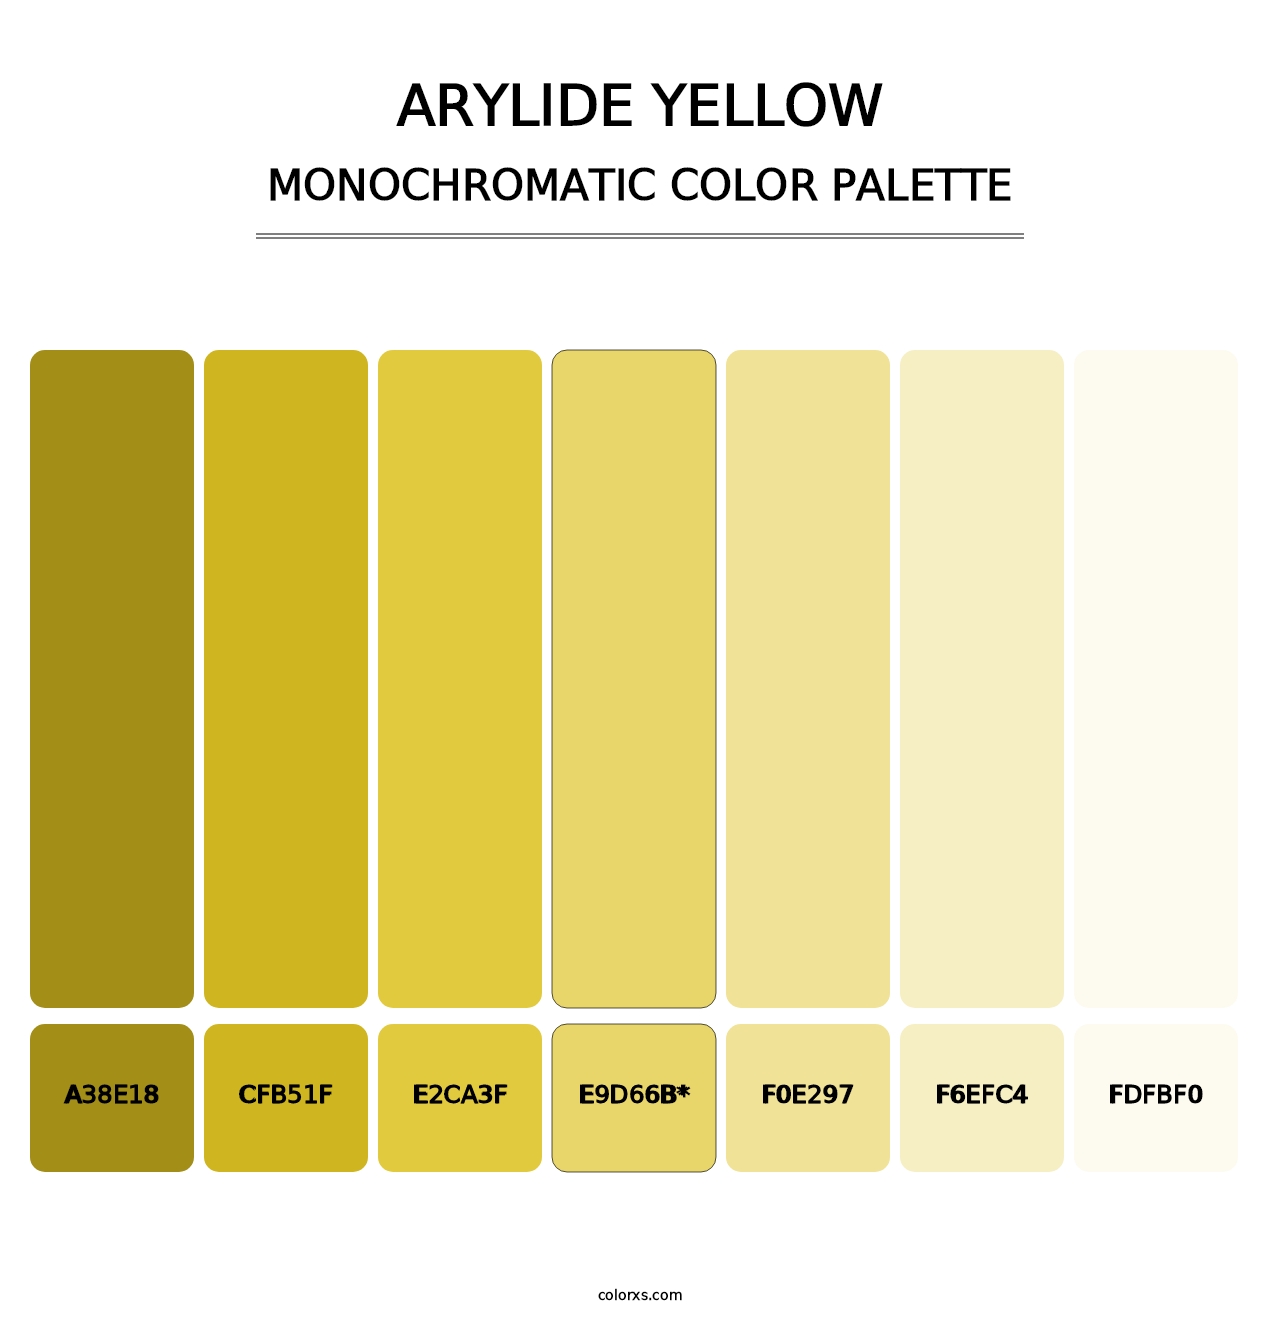 Arylide Yellow - Monochromatic Color Palette